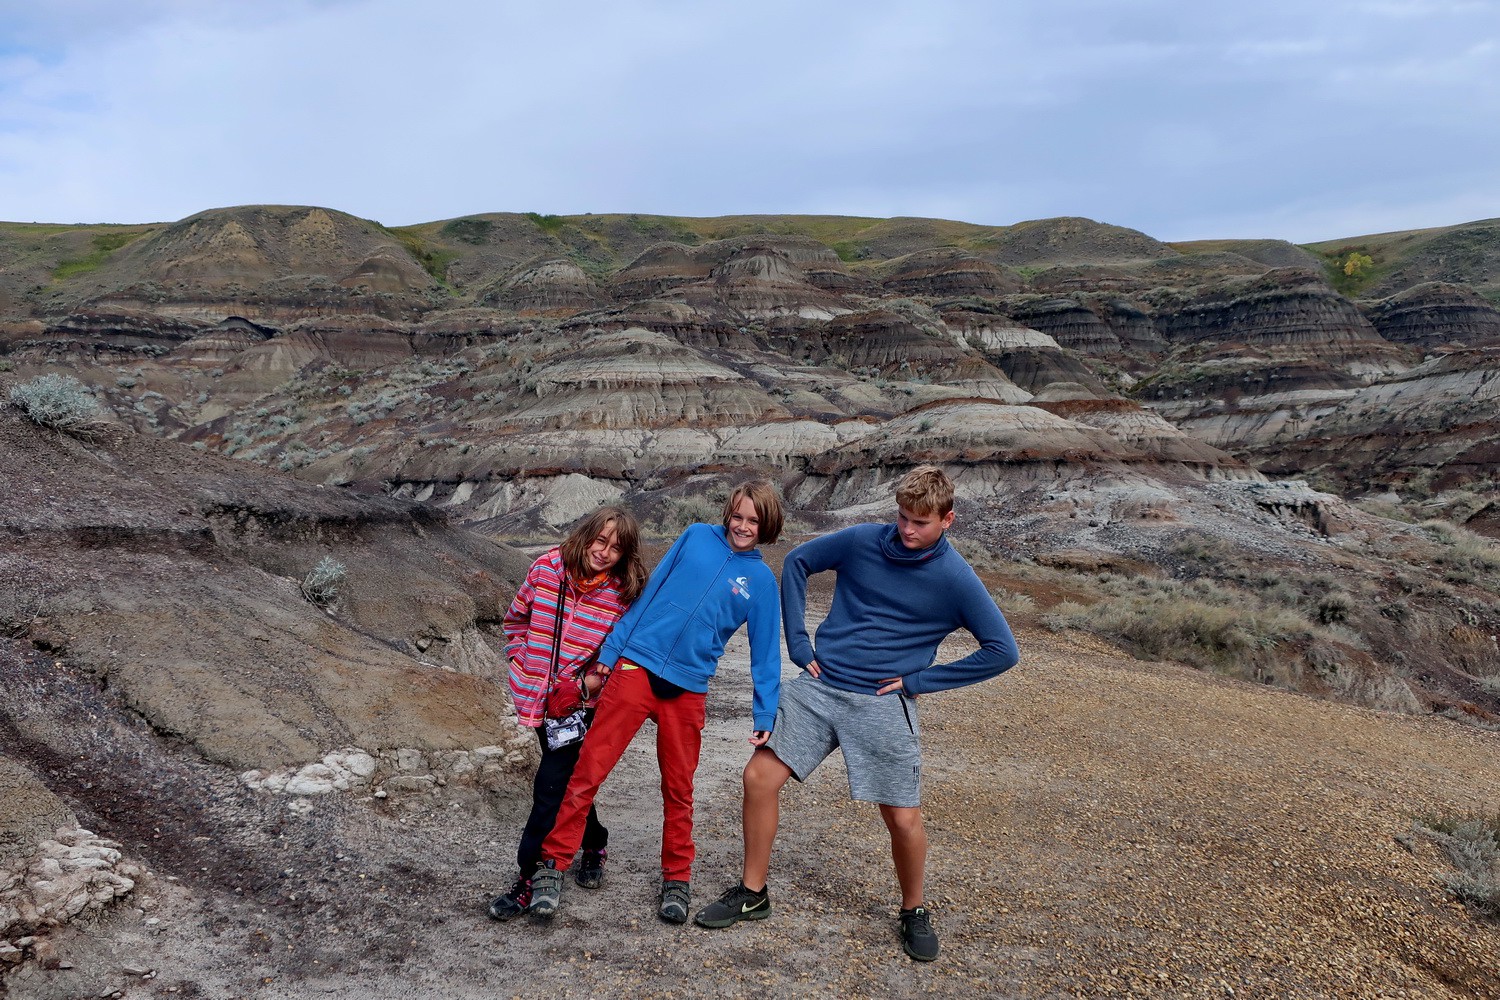 Kids in the badlands around the Royal Tyrrell Museum